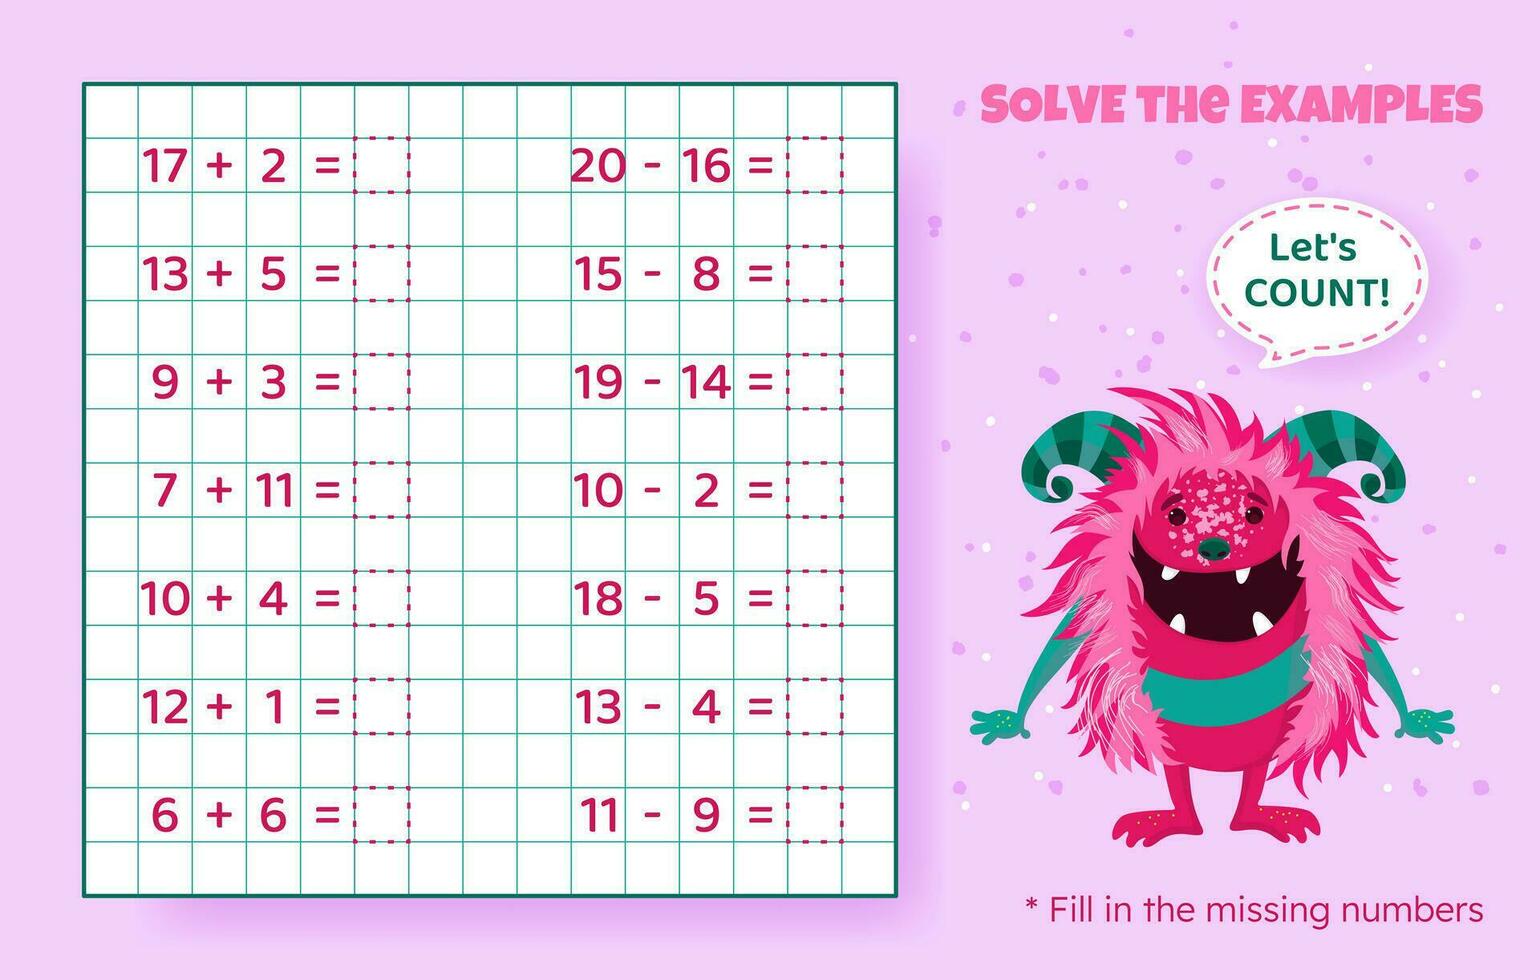 Solve the examples. Addition and subtraction up to 20. Mathematical puzzle game. Worksheet for preschool kids. Vector illustration. Cartoon educational game with cute monster for children.